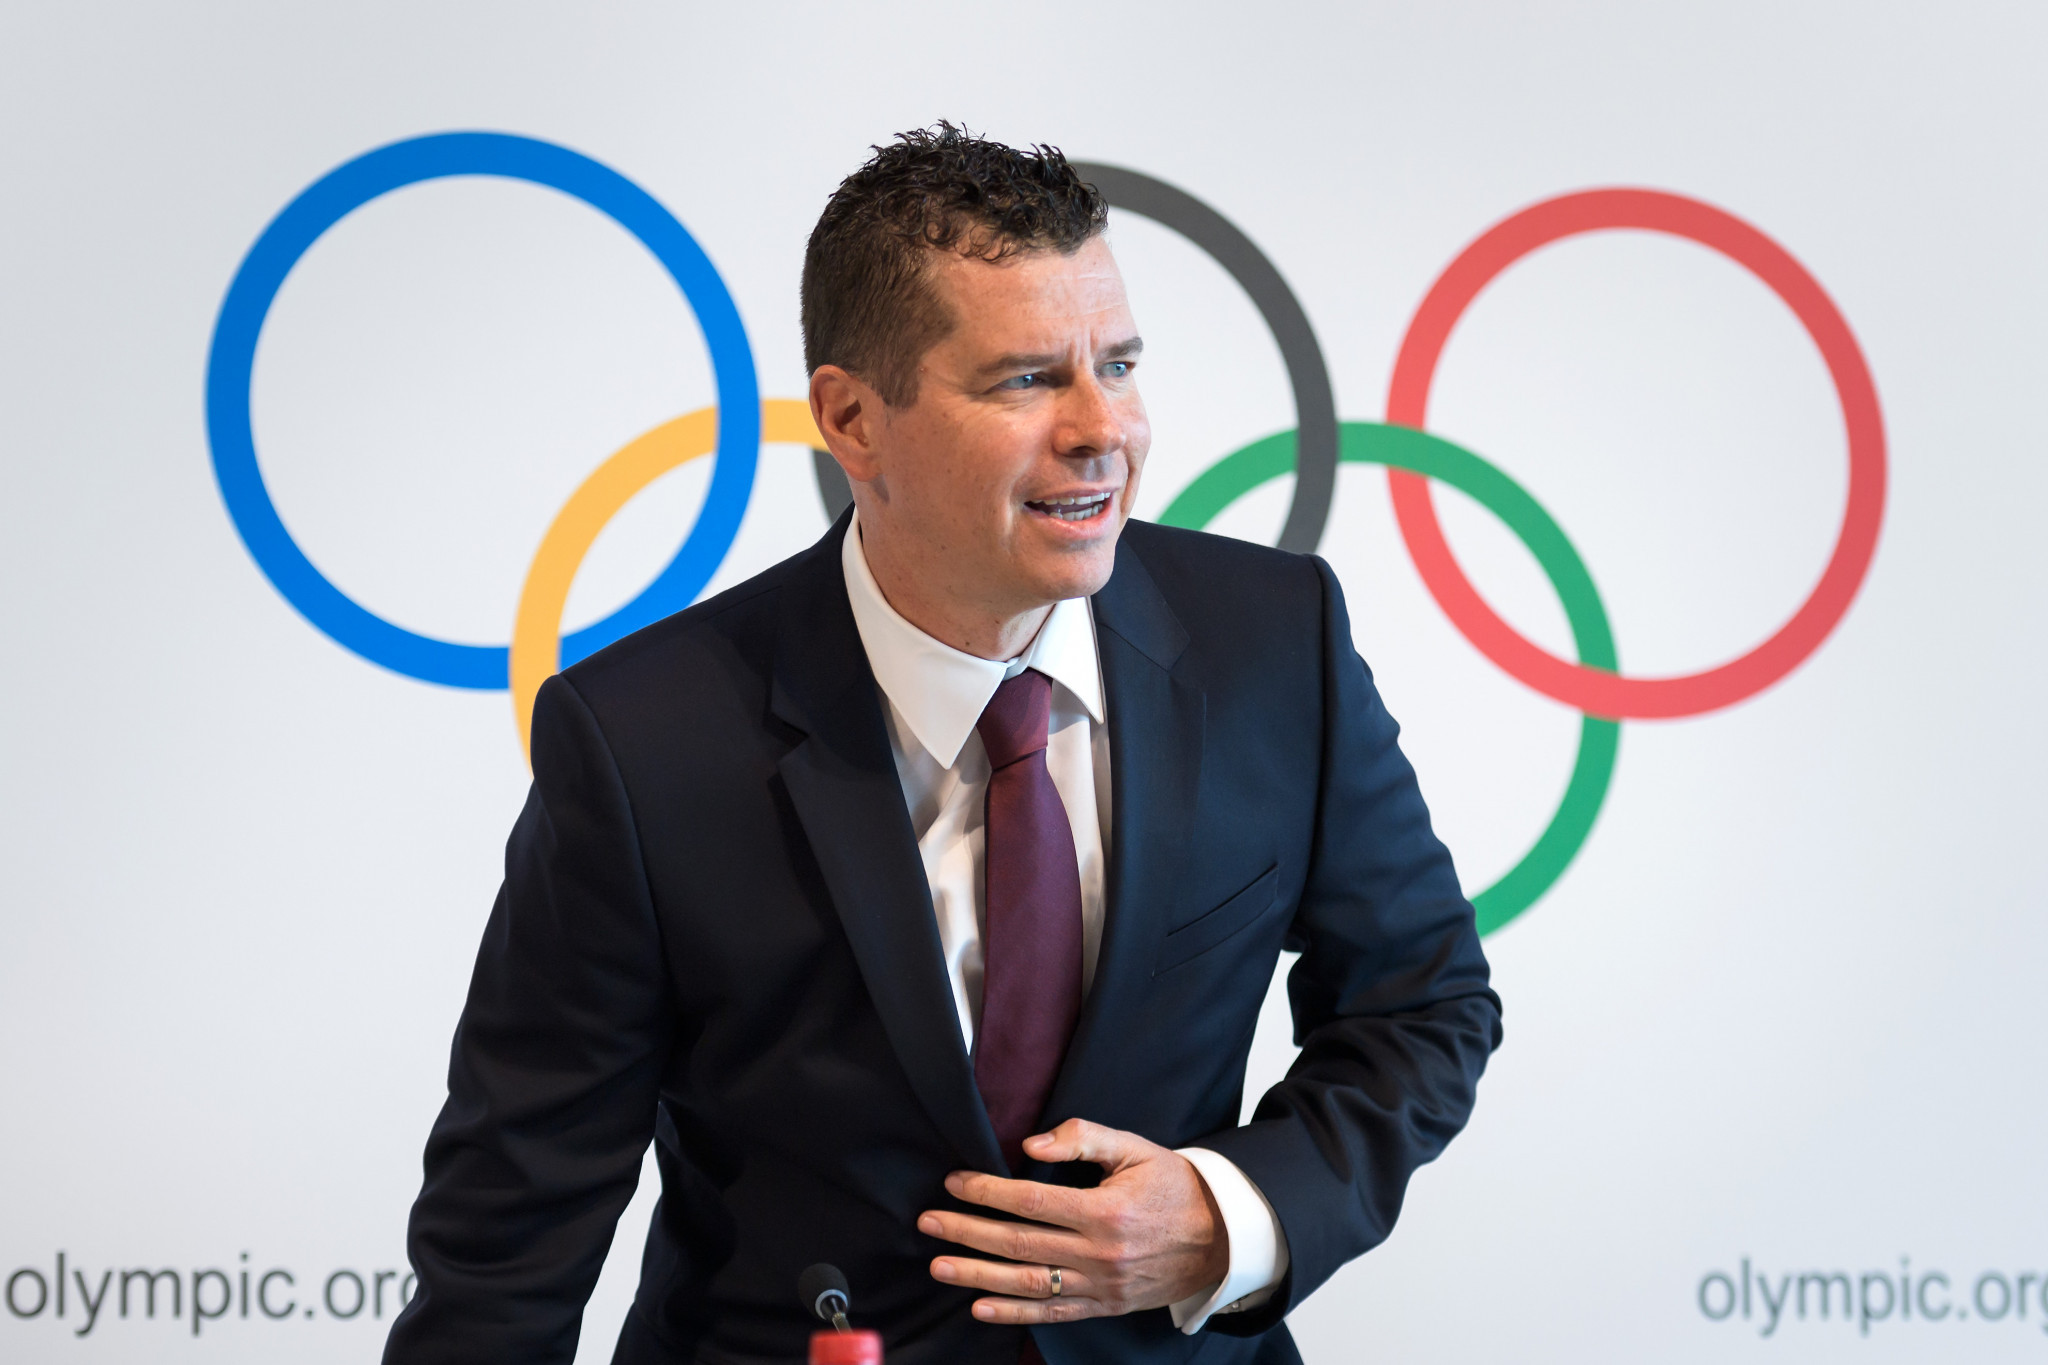 IOC sports director Kit McConnell claims he is pleased with skateboarding's preparations for its Olympic debut at Tokyo 2020, despite the opposition from many within the sport's community ©Getty Images